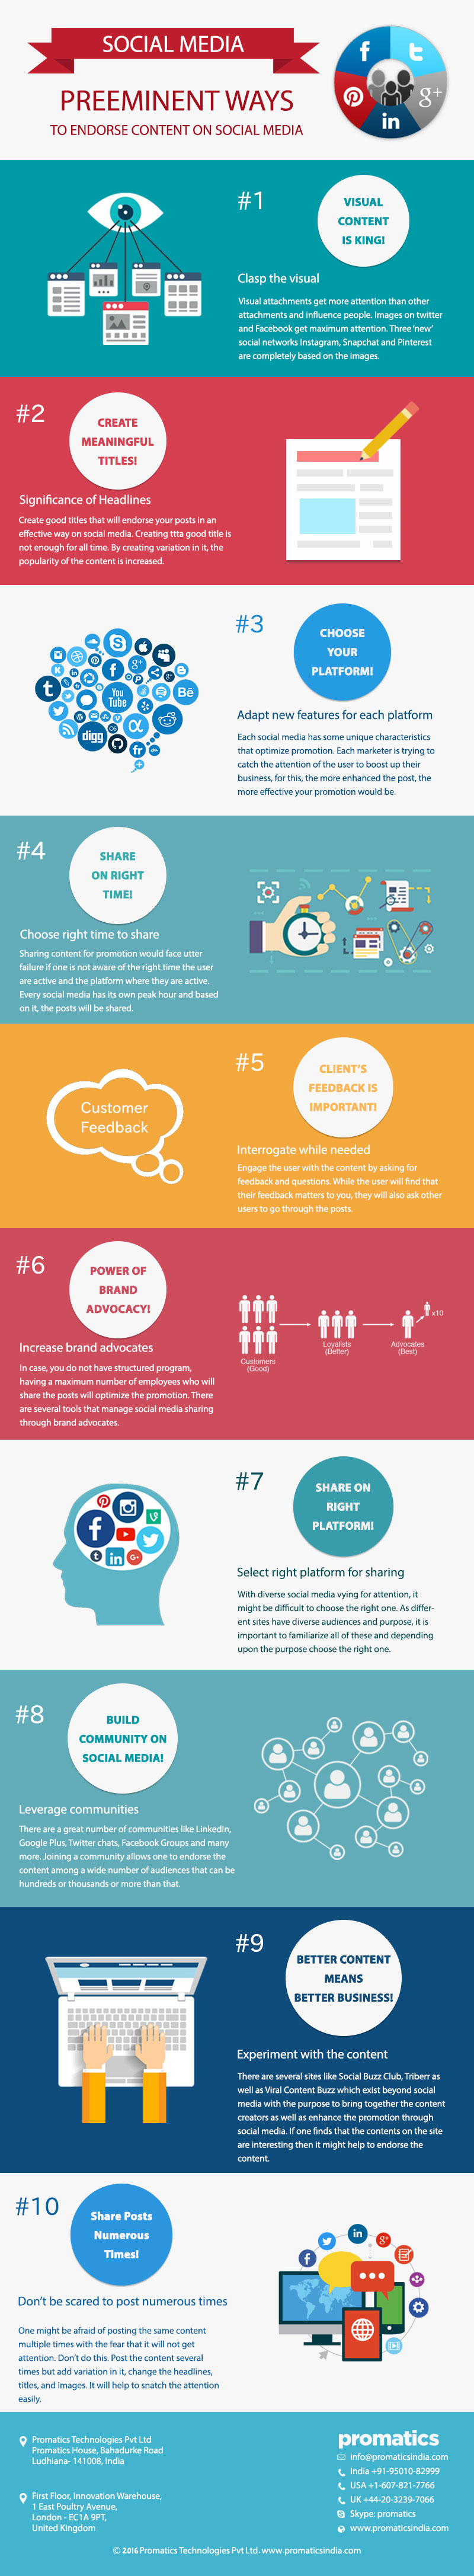 Preeminent ways to endorse content on social media